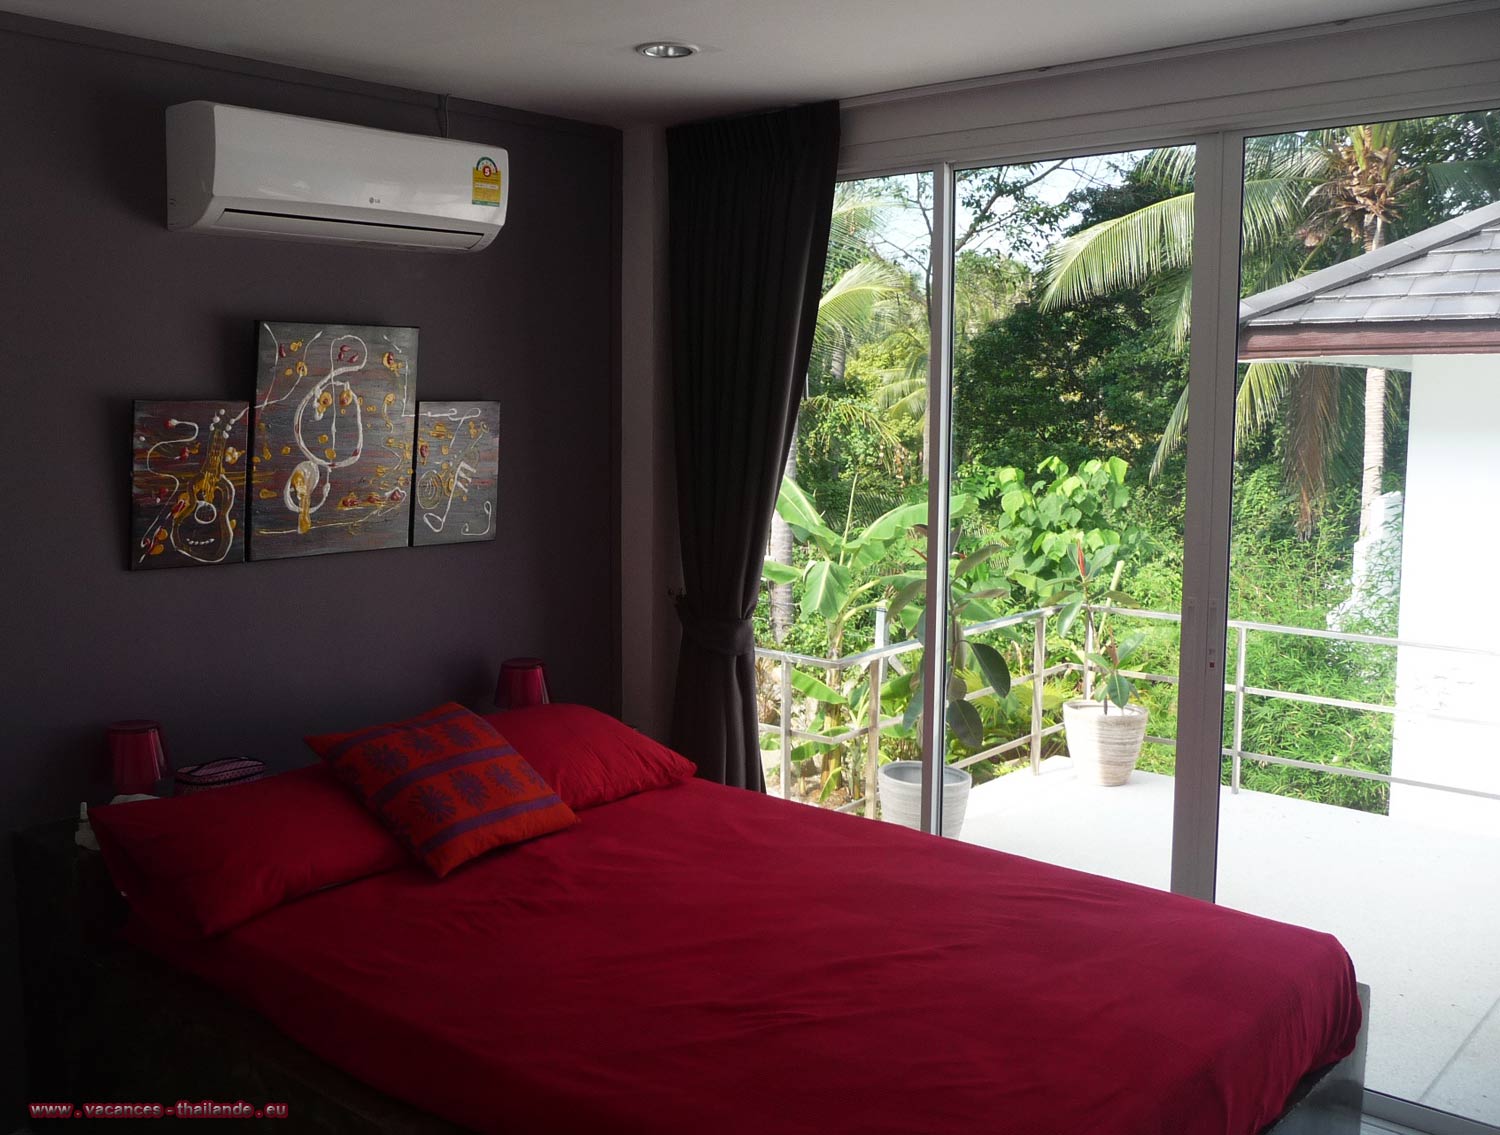 holiday-thailand house with the red room and double bed with 1.5 m rented scooters for your problem without displacement,